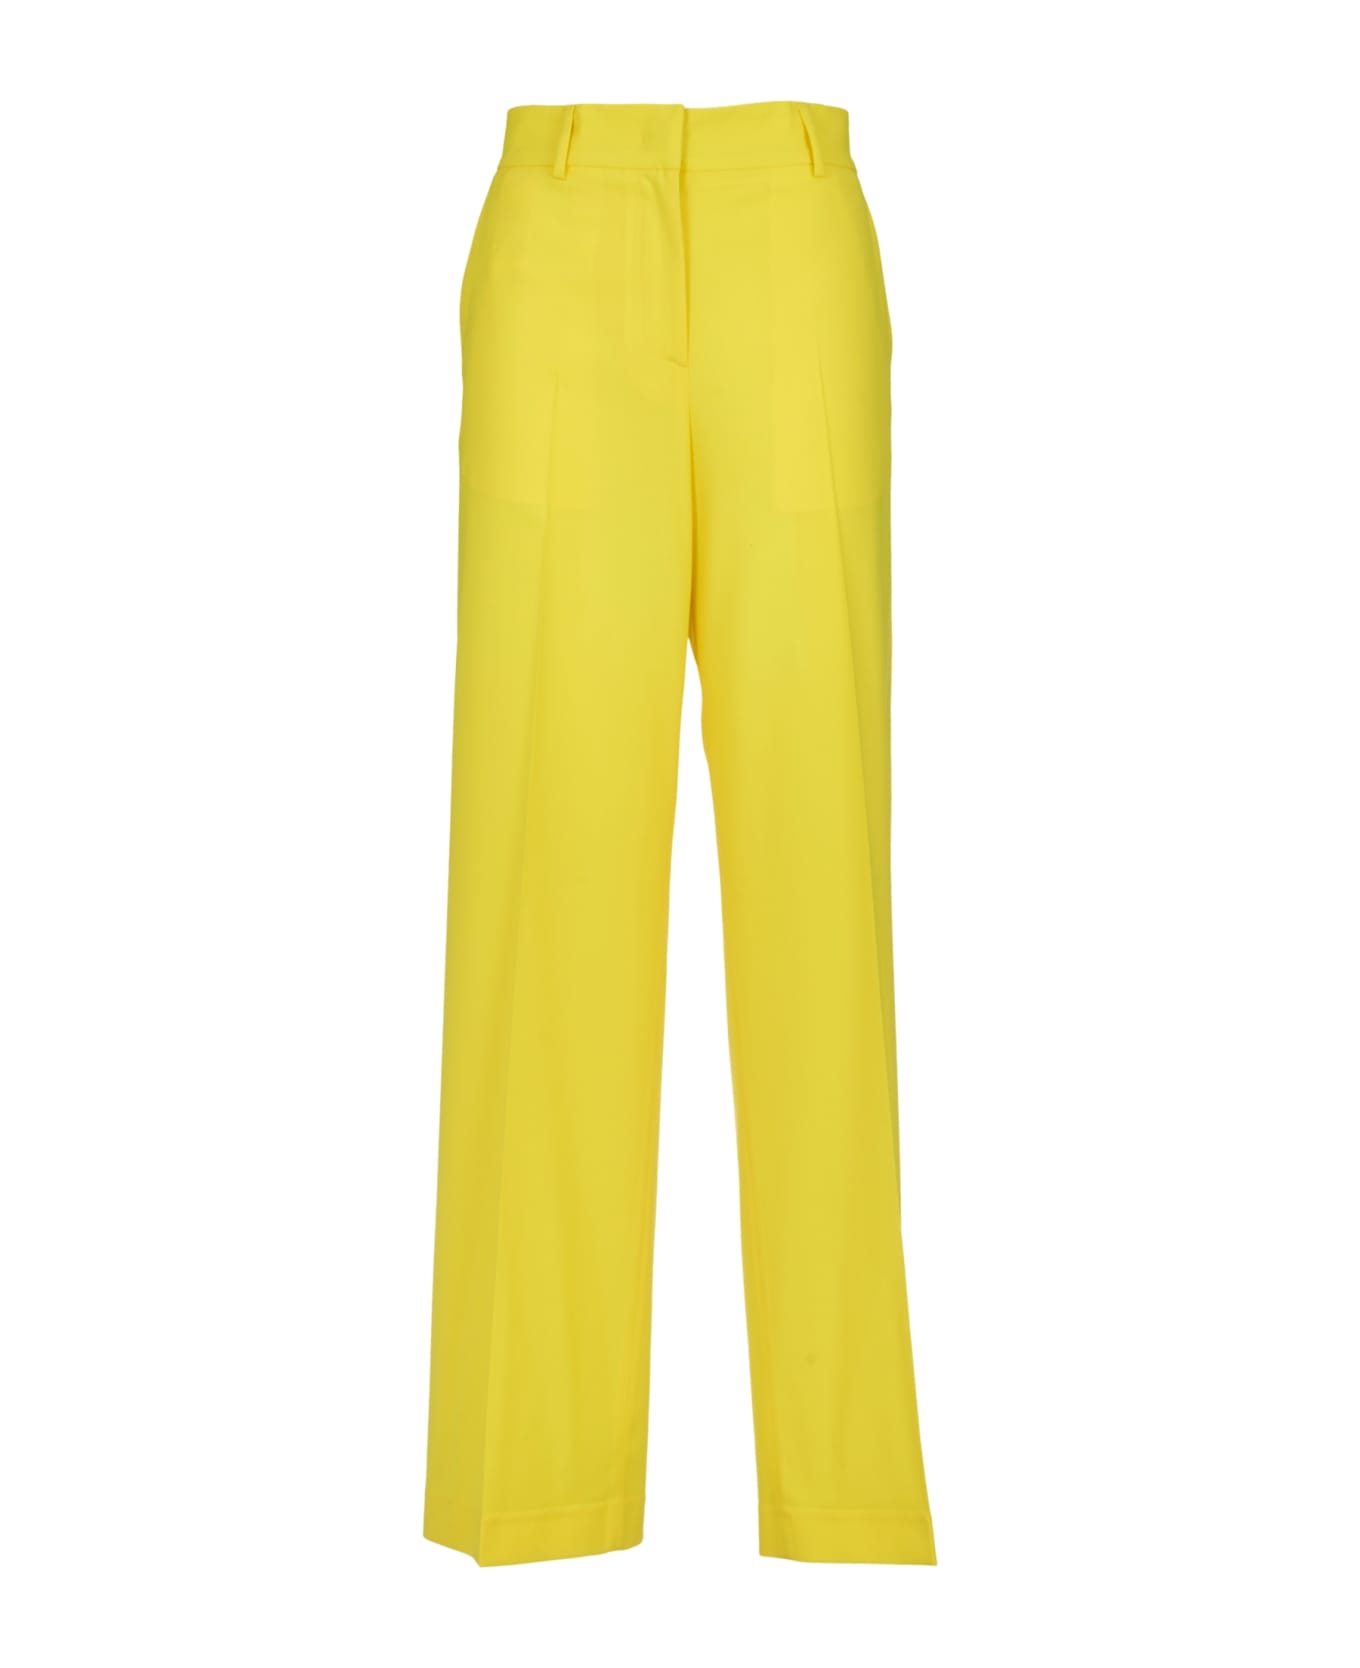 MSGM Straight Concealed Trousers - Yellow